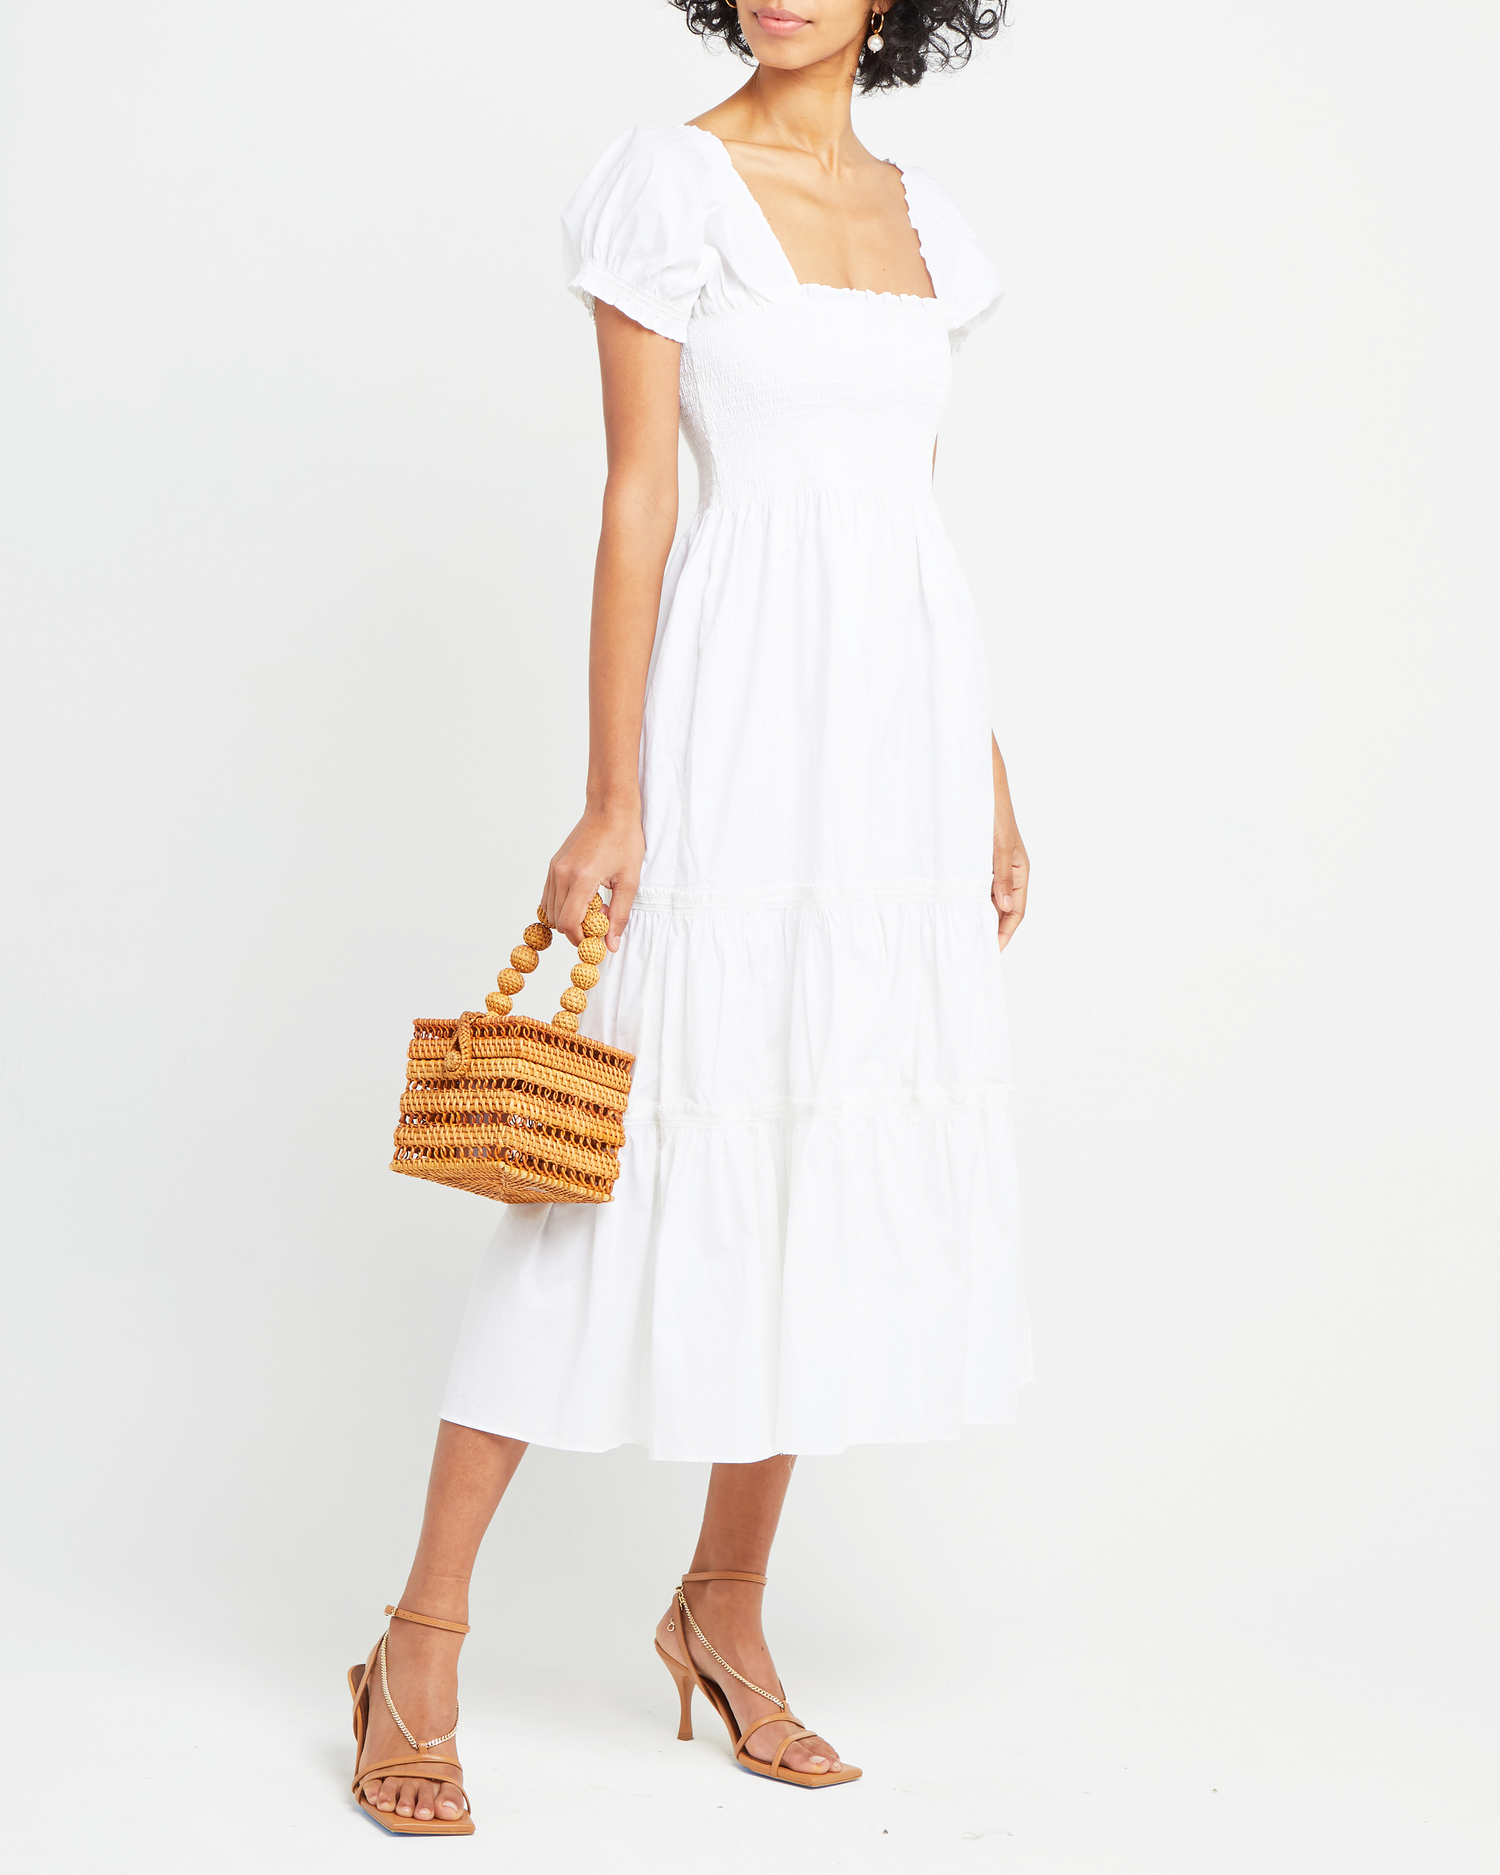 Third image of Square Neck Smocked Maxi Dress, a white maxi dress, smocked, puff sleeves, short sleeves